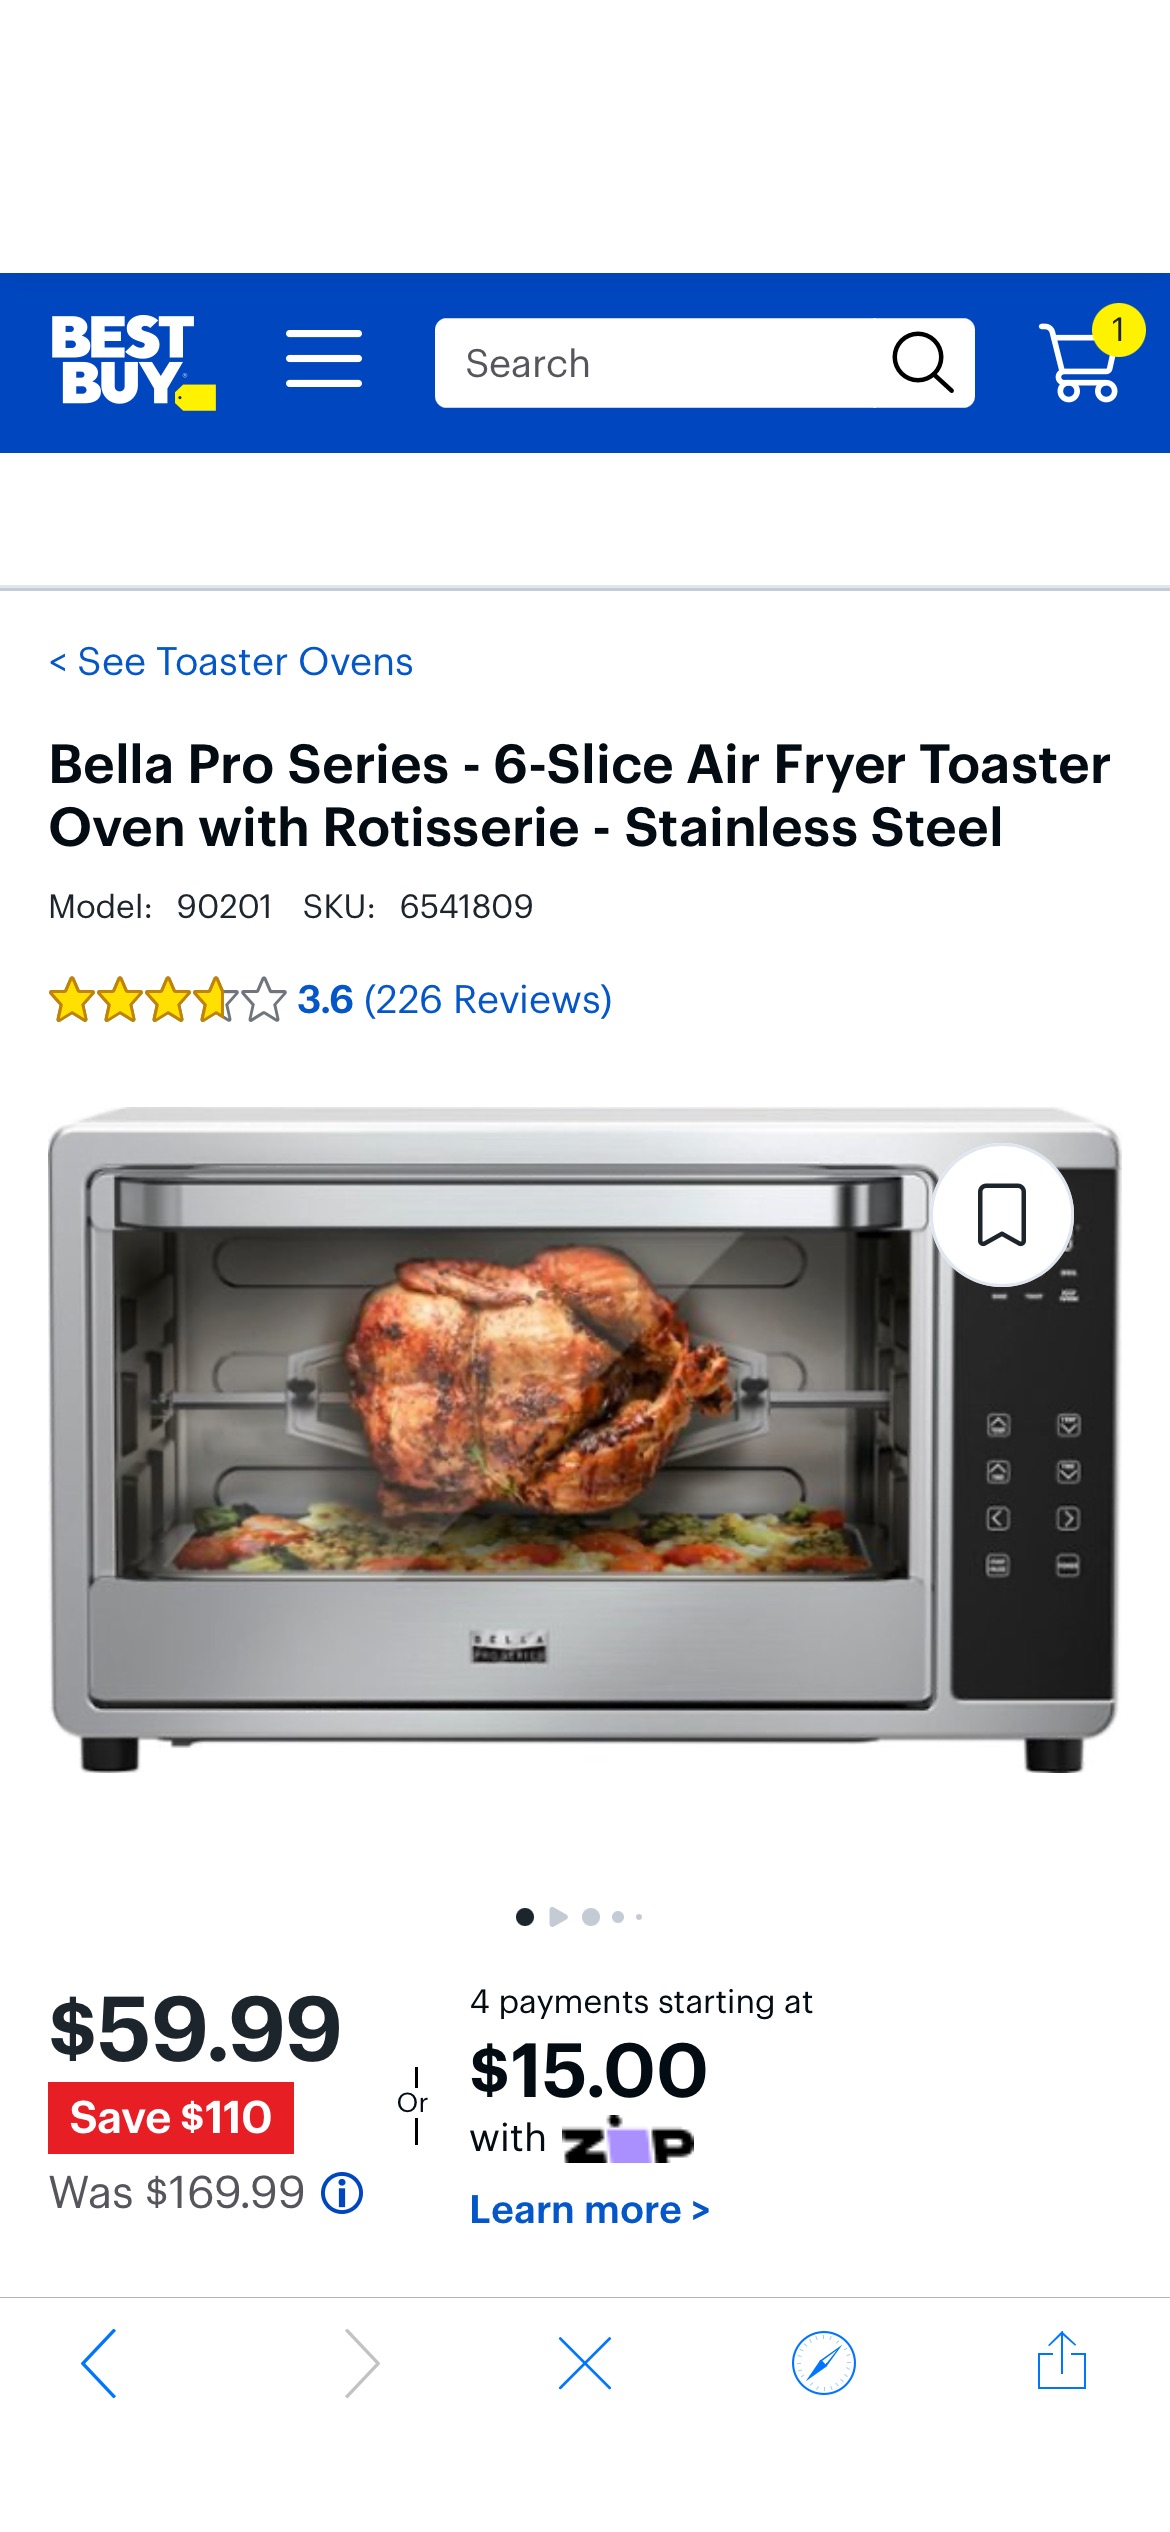 Bella Pro Series 6-Slice Air Fryer Toaster Oven with Rotisserie Stainless Steel 90201 - Best Buy